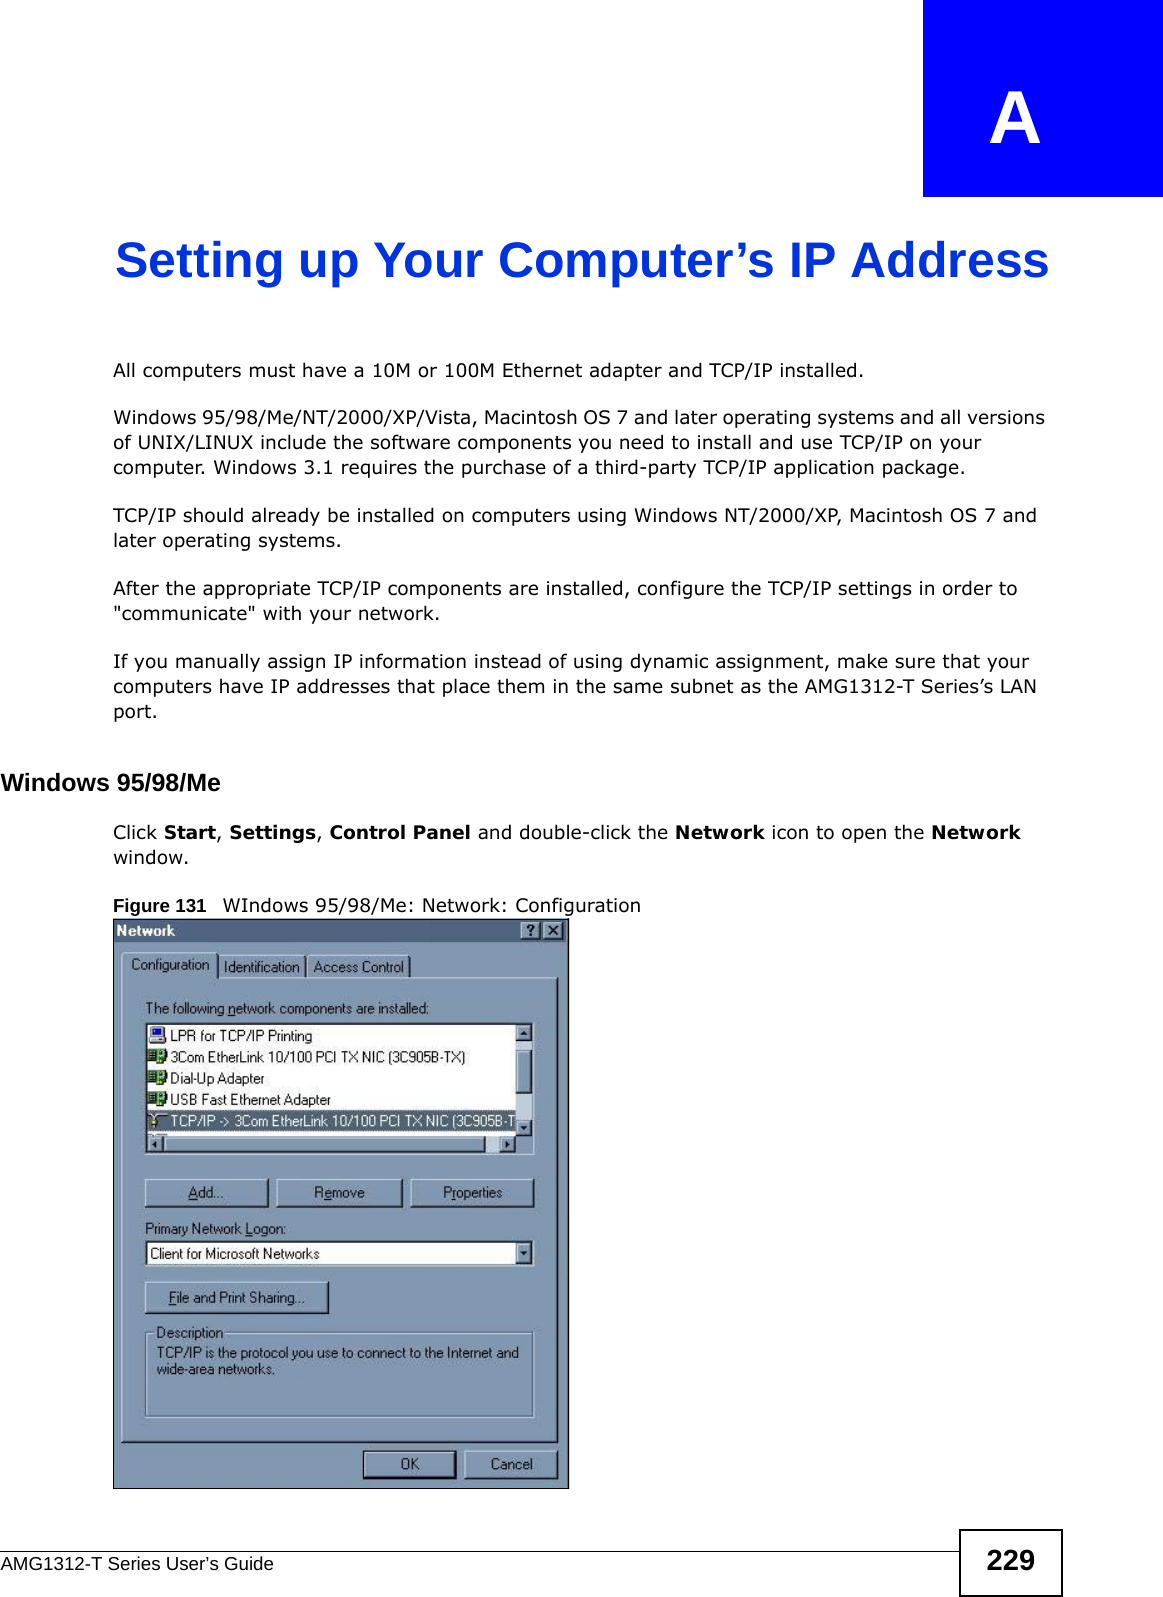 AMG1312-T Series User’s Guide 229APPENDIX   ASetting up Your Computer’s IP AddressAll computers must have a 10M or 100M Ethernet adapter and TCP/IP installed. Windows 95/98/Me/NT/2000/XP/Vista, Macintosh OS 7 and later operating systems and all versions of UNIX/LINUX include the software components you need to install and use TCP/IP on your computer. Windows 3.1 requires the purchase of a third-party TCP/IP application package.TCP/IP should already be installed on computers using Windows NT/2000/XP, Macintosh OS 7 and later operating systems.After the appropriate TCP/IP components are installed, configure the TCP/IP settings in order to &quot;communicate&quot; with your network. If you manually assign IP information instead of using dynamic assignment, make sure that your computers have IP addresses that place them in the same subnet as the AMG1312-T Series’s LAN port.Windows 95/98/MeClick Start, Settings, Control Panel and double-click the Network icon to open the Network window.Figure 131   WIndows 95/98/Me: Network: Configuration